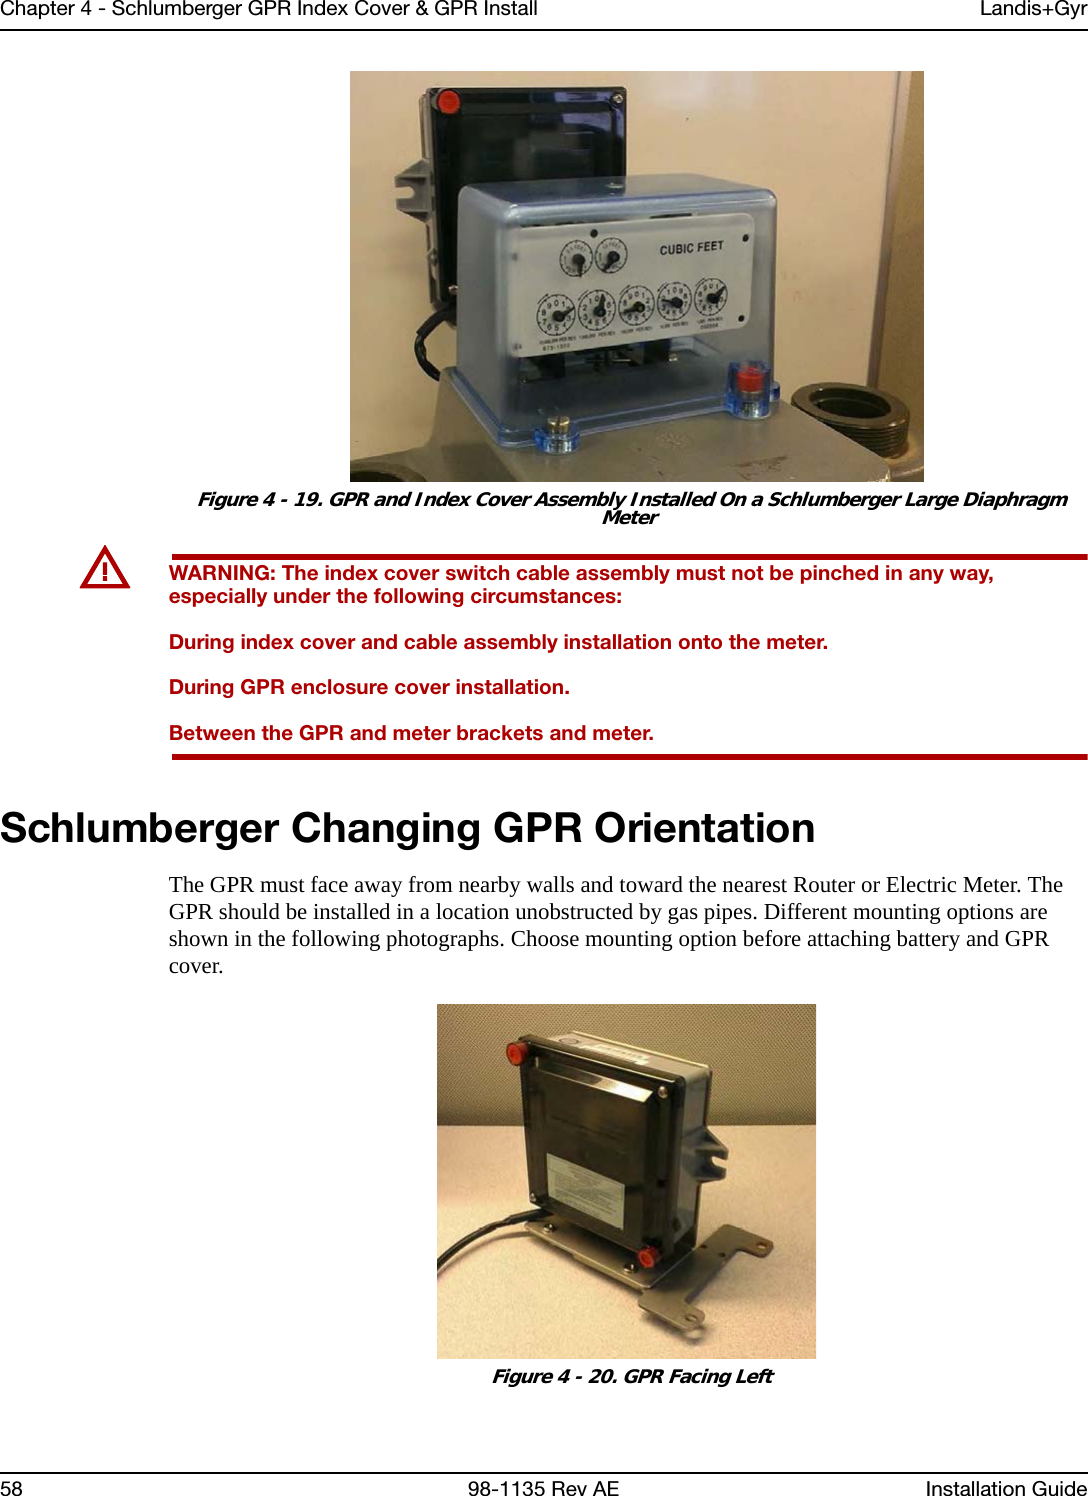 Chapter 4 - Schlumberger GPR Index Cover &amp; GPR Install Landis+Gyr58 98-1135 Rev AE Installation Guide Figure 4 - 19. GPR and Index Cover Assembly Installed On a Schlumberger Large Diaphragm MeterUWARNING: The index cover switch cable assembly must not be pinched in any way, especially under the following circumstances:During index cover and cable assembly installation onto the meter.During GPR enclosure cover installation.Between the GPR and meter brackets and meter. Schlumberger Changing GPR OrientationThe GPR must face away from nearby walls and toward the nearest Router or Electric Meter. The GPR should be installed in a location unobstructed by gas pipes. Different mounting options are shown in the following photographs. Choose mounting option before attaching battery and GPR cover. Figure 4 - 20. GPR Facing Left